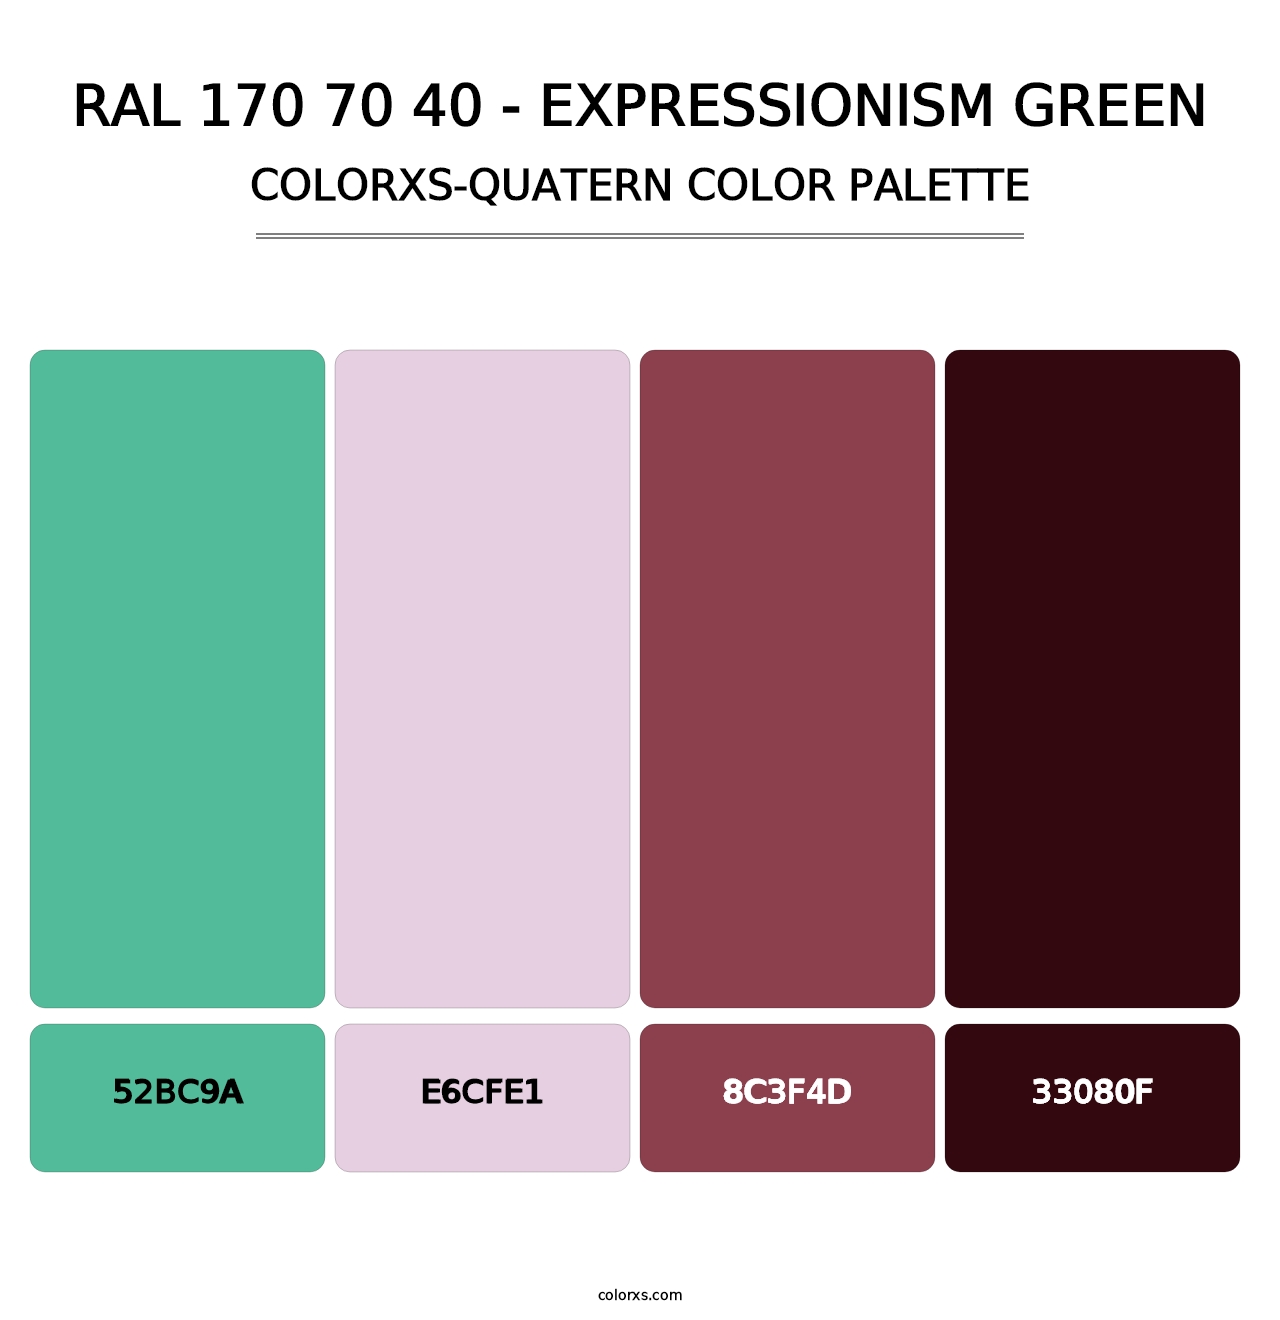 RAL 170 70 40 - Expressionism Green - Colorxs Quatern Palette